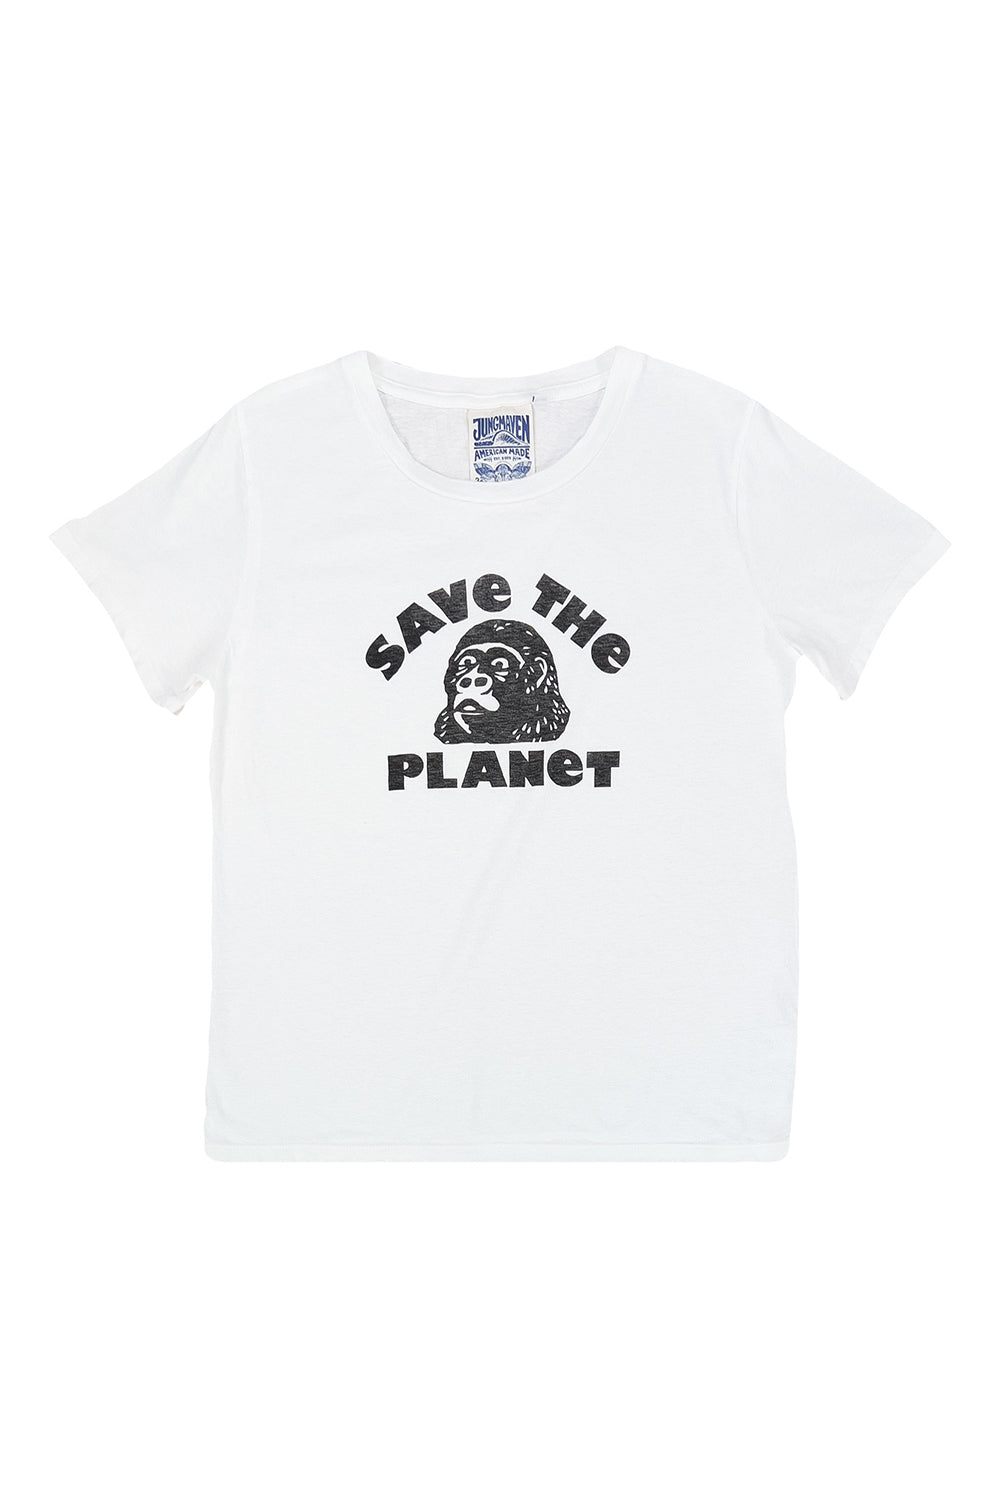 Save the Planet Ojai Tee | Jungmaven Hemp Clothing & Accessories / Color: Washed White